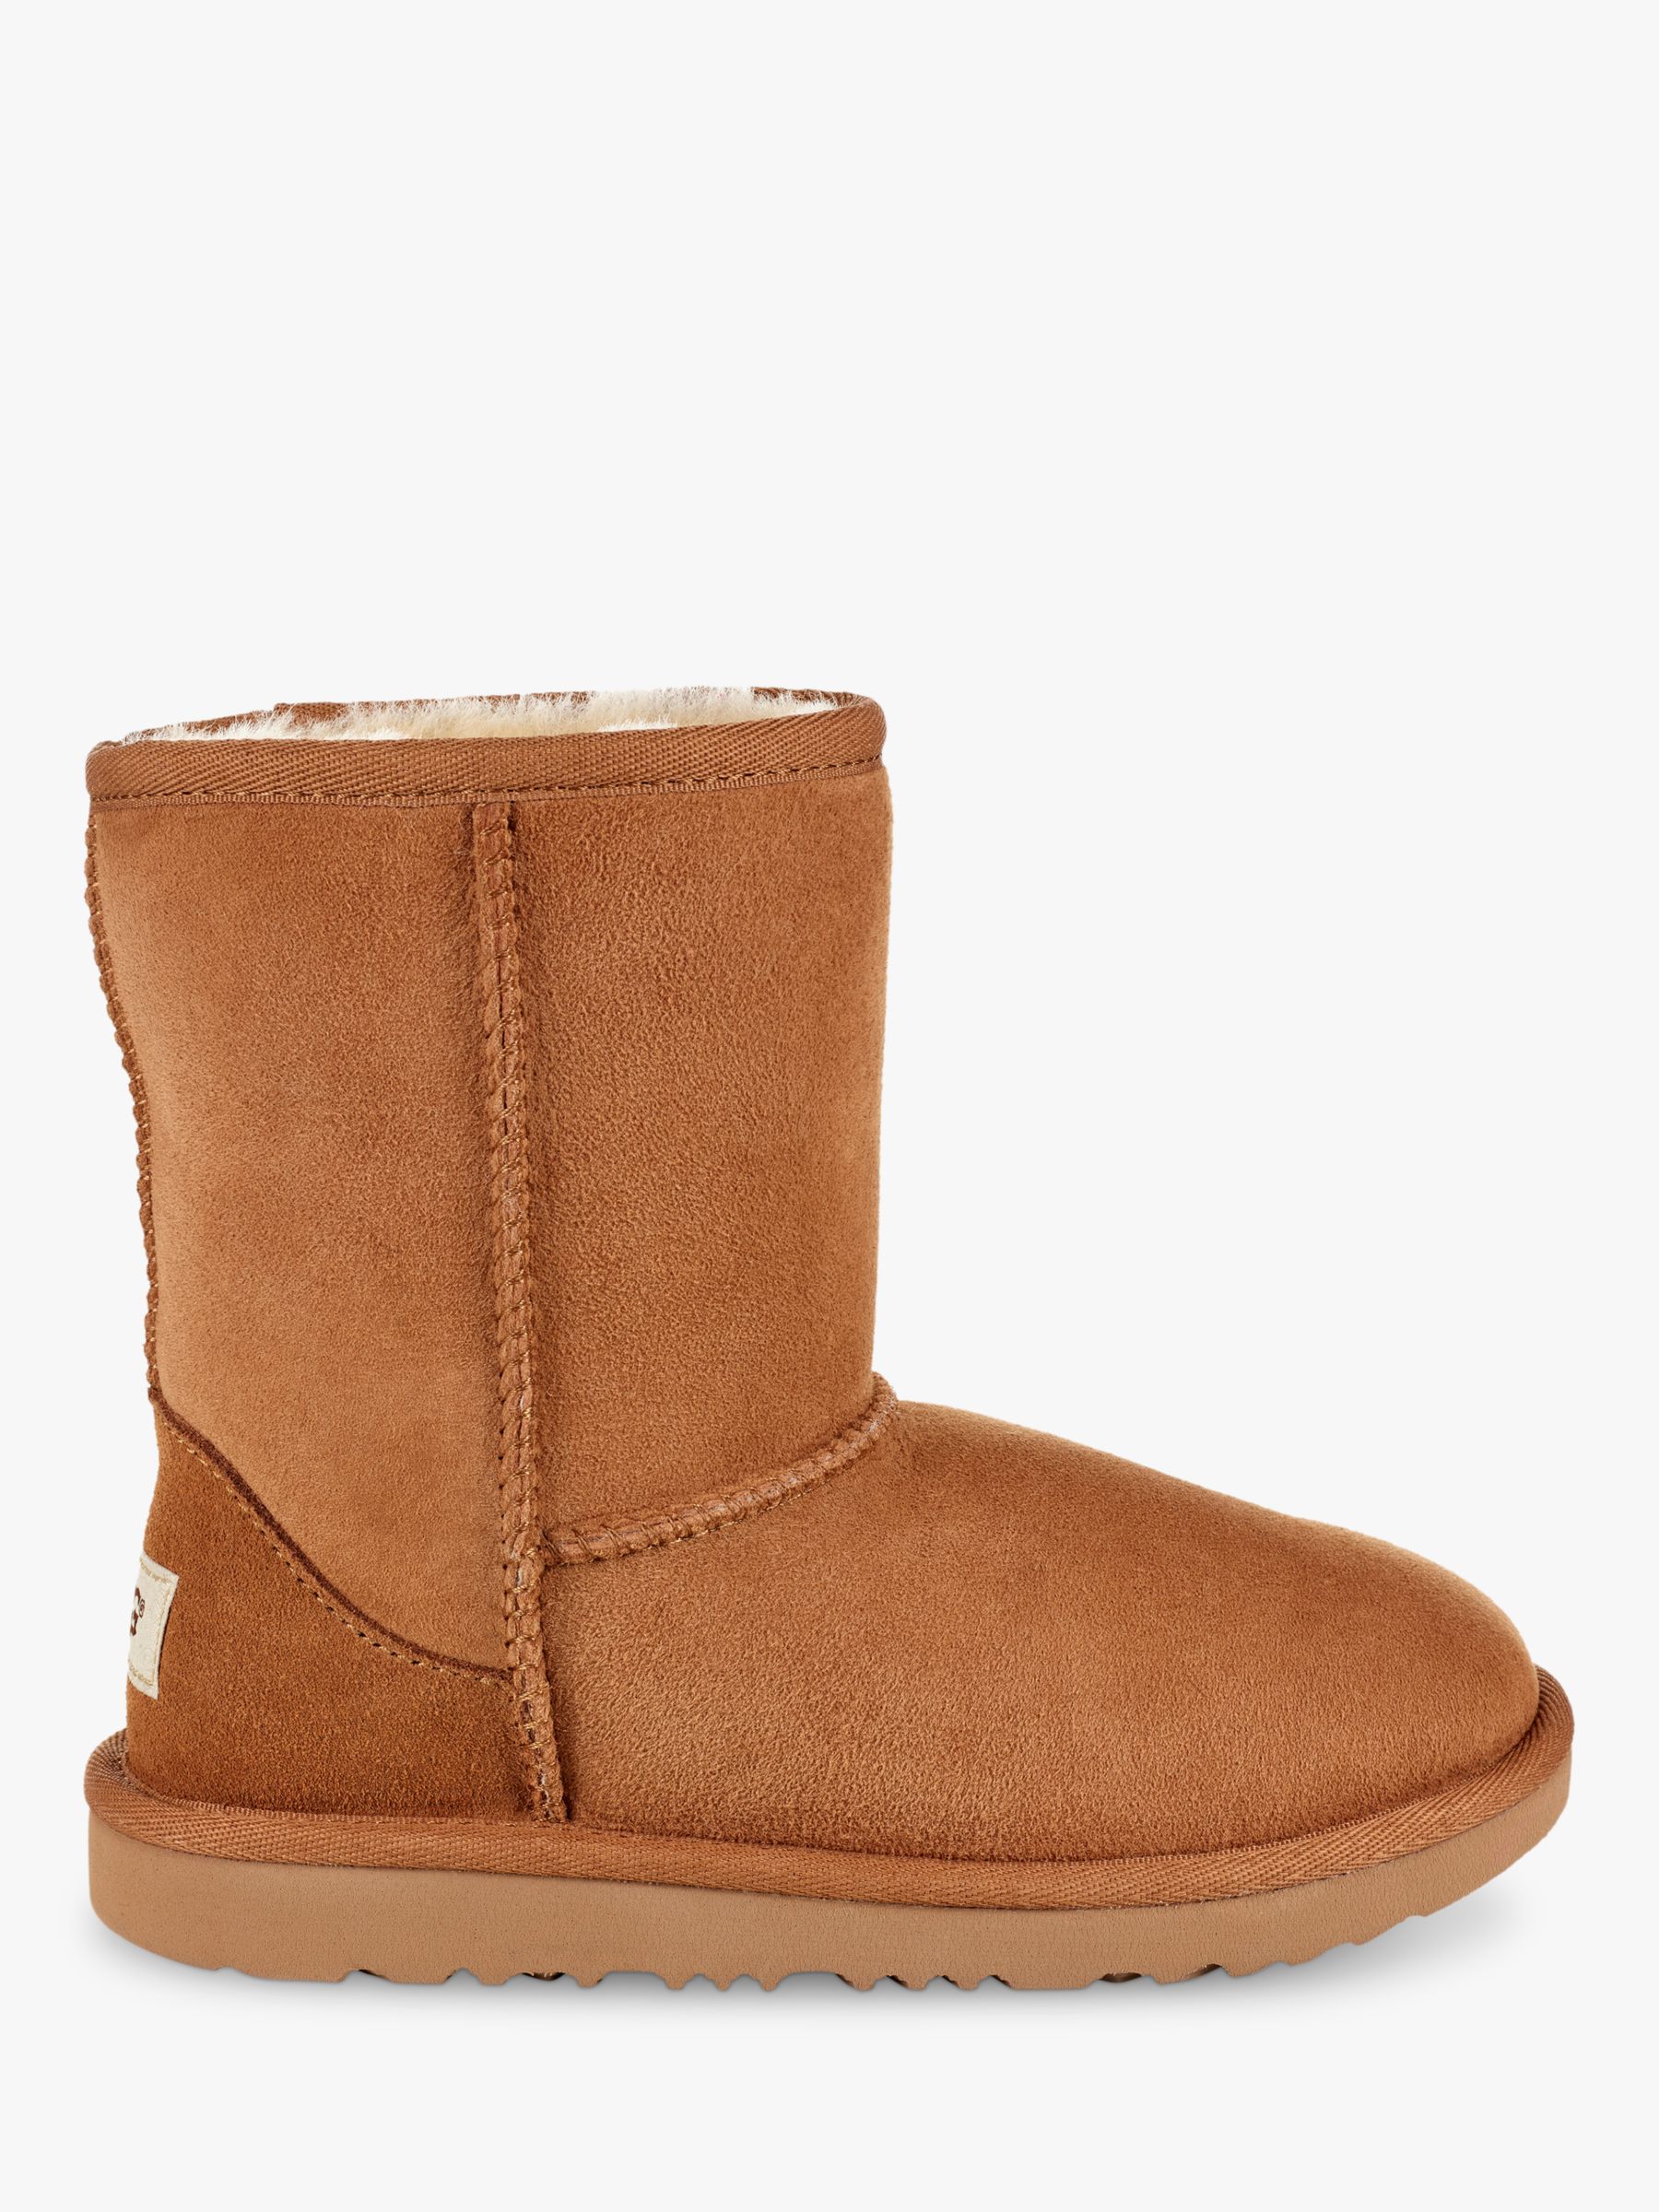 ugg boots classic chestnut